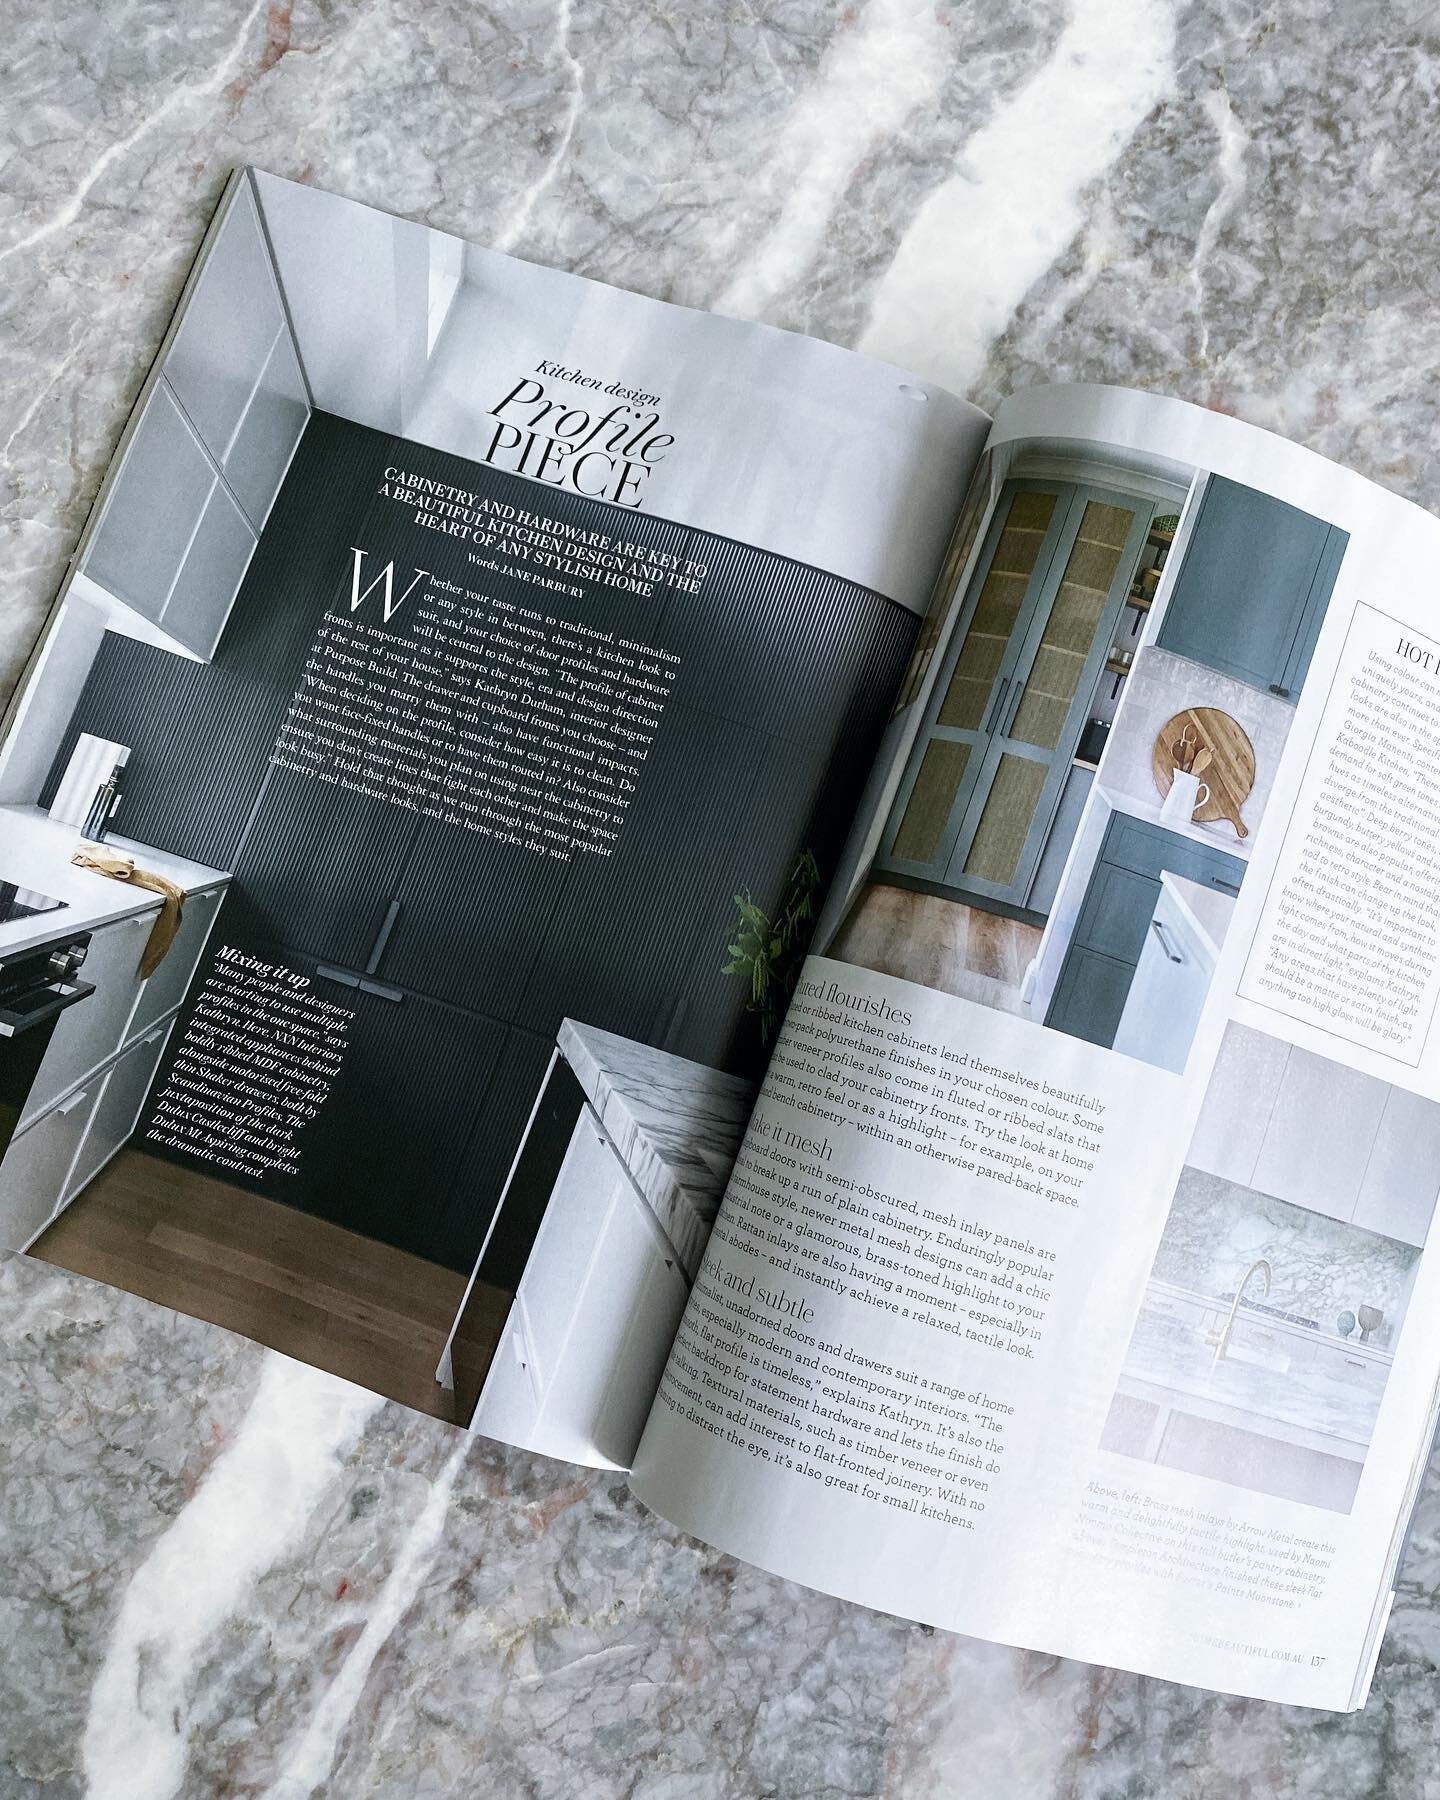 Our Interior Designer Kathryn offers some useful tips, when selecting your joinery profile and finishes, in the May issue of @homebeautiful magazine - Out now!

#kitchendesign #interiordesign #purposebuild #purposebuildpr #tipsandtricks #interiors123